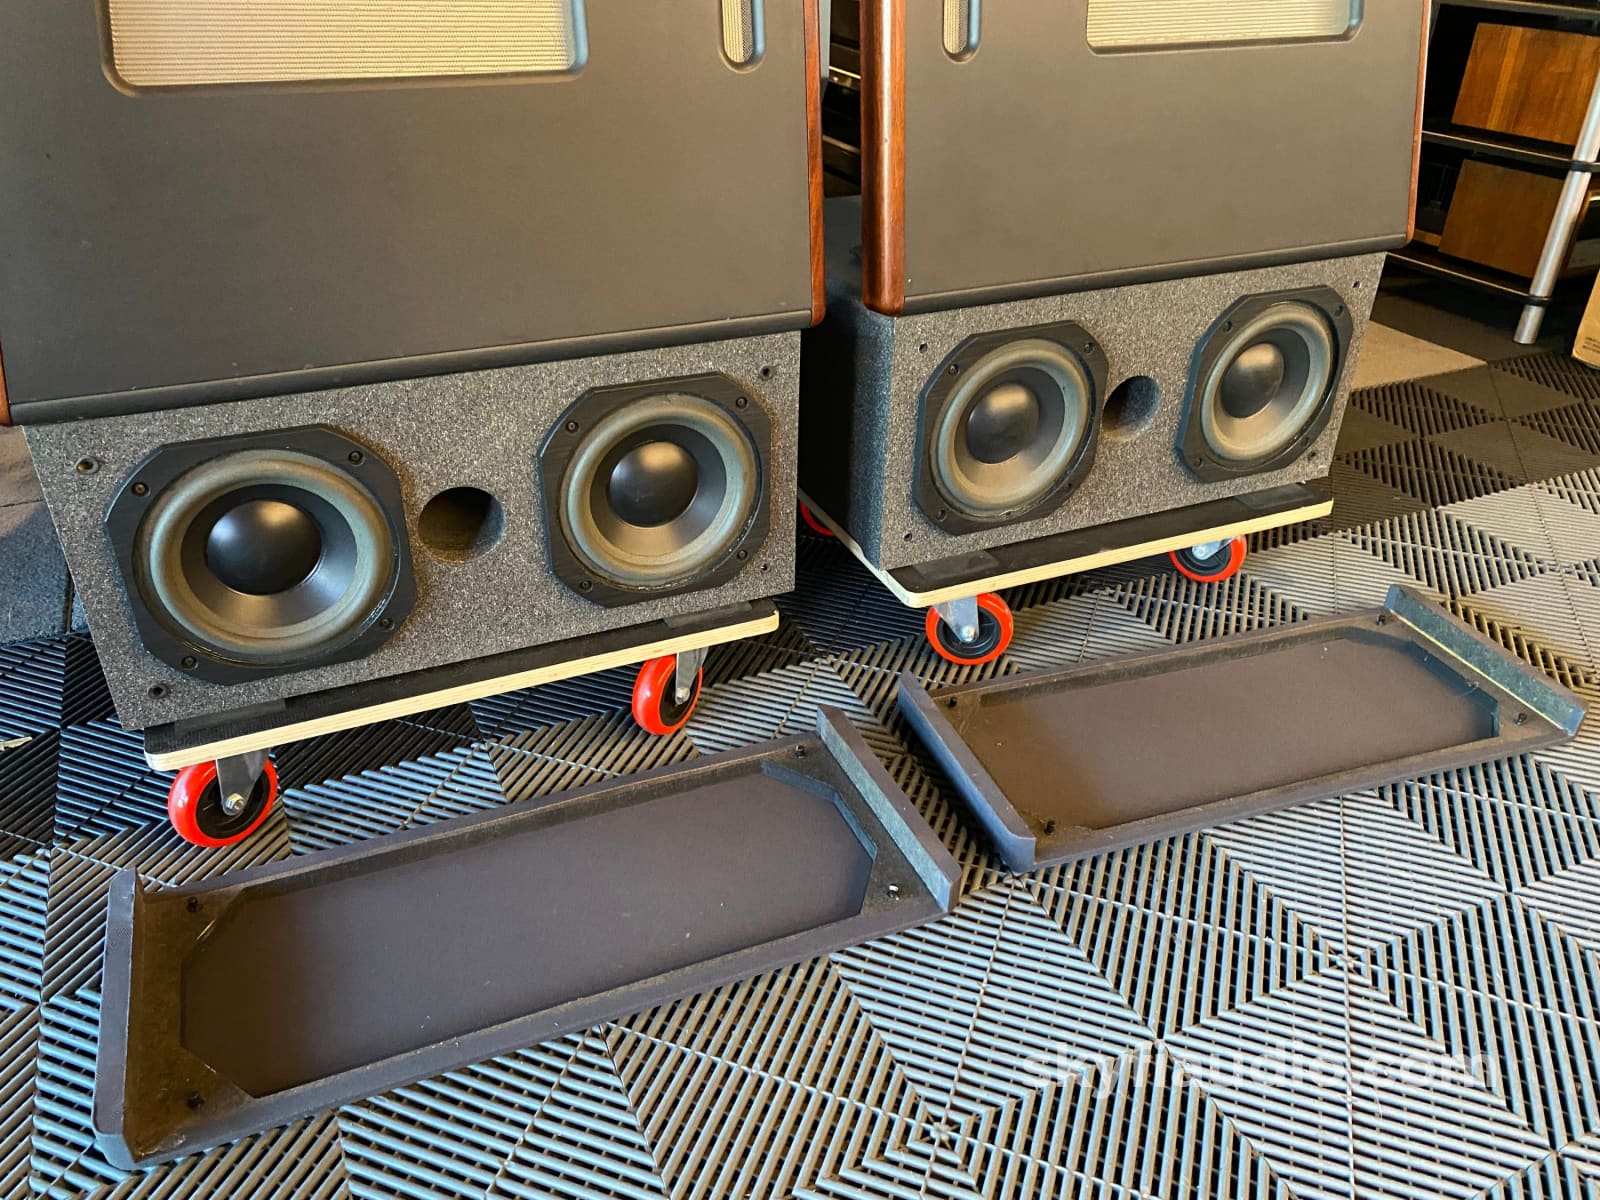 Apogee Stage Full Range Ribbon Speakers W/Matching Mini-Grand Subwoofers + Dax Crossover